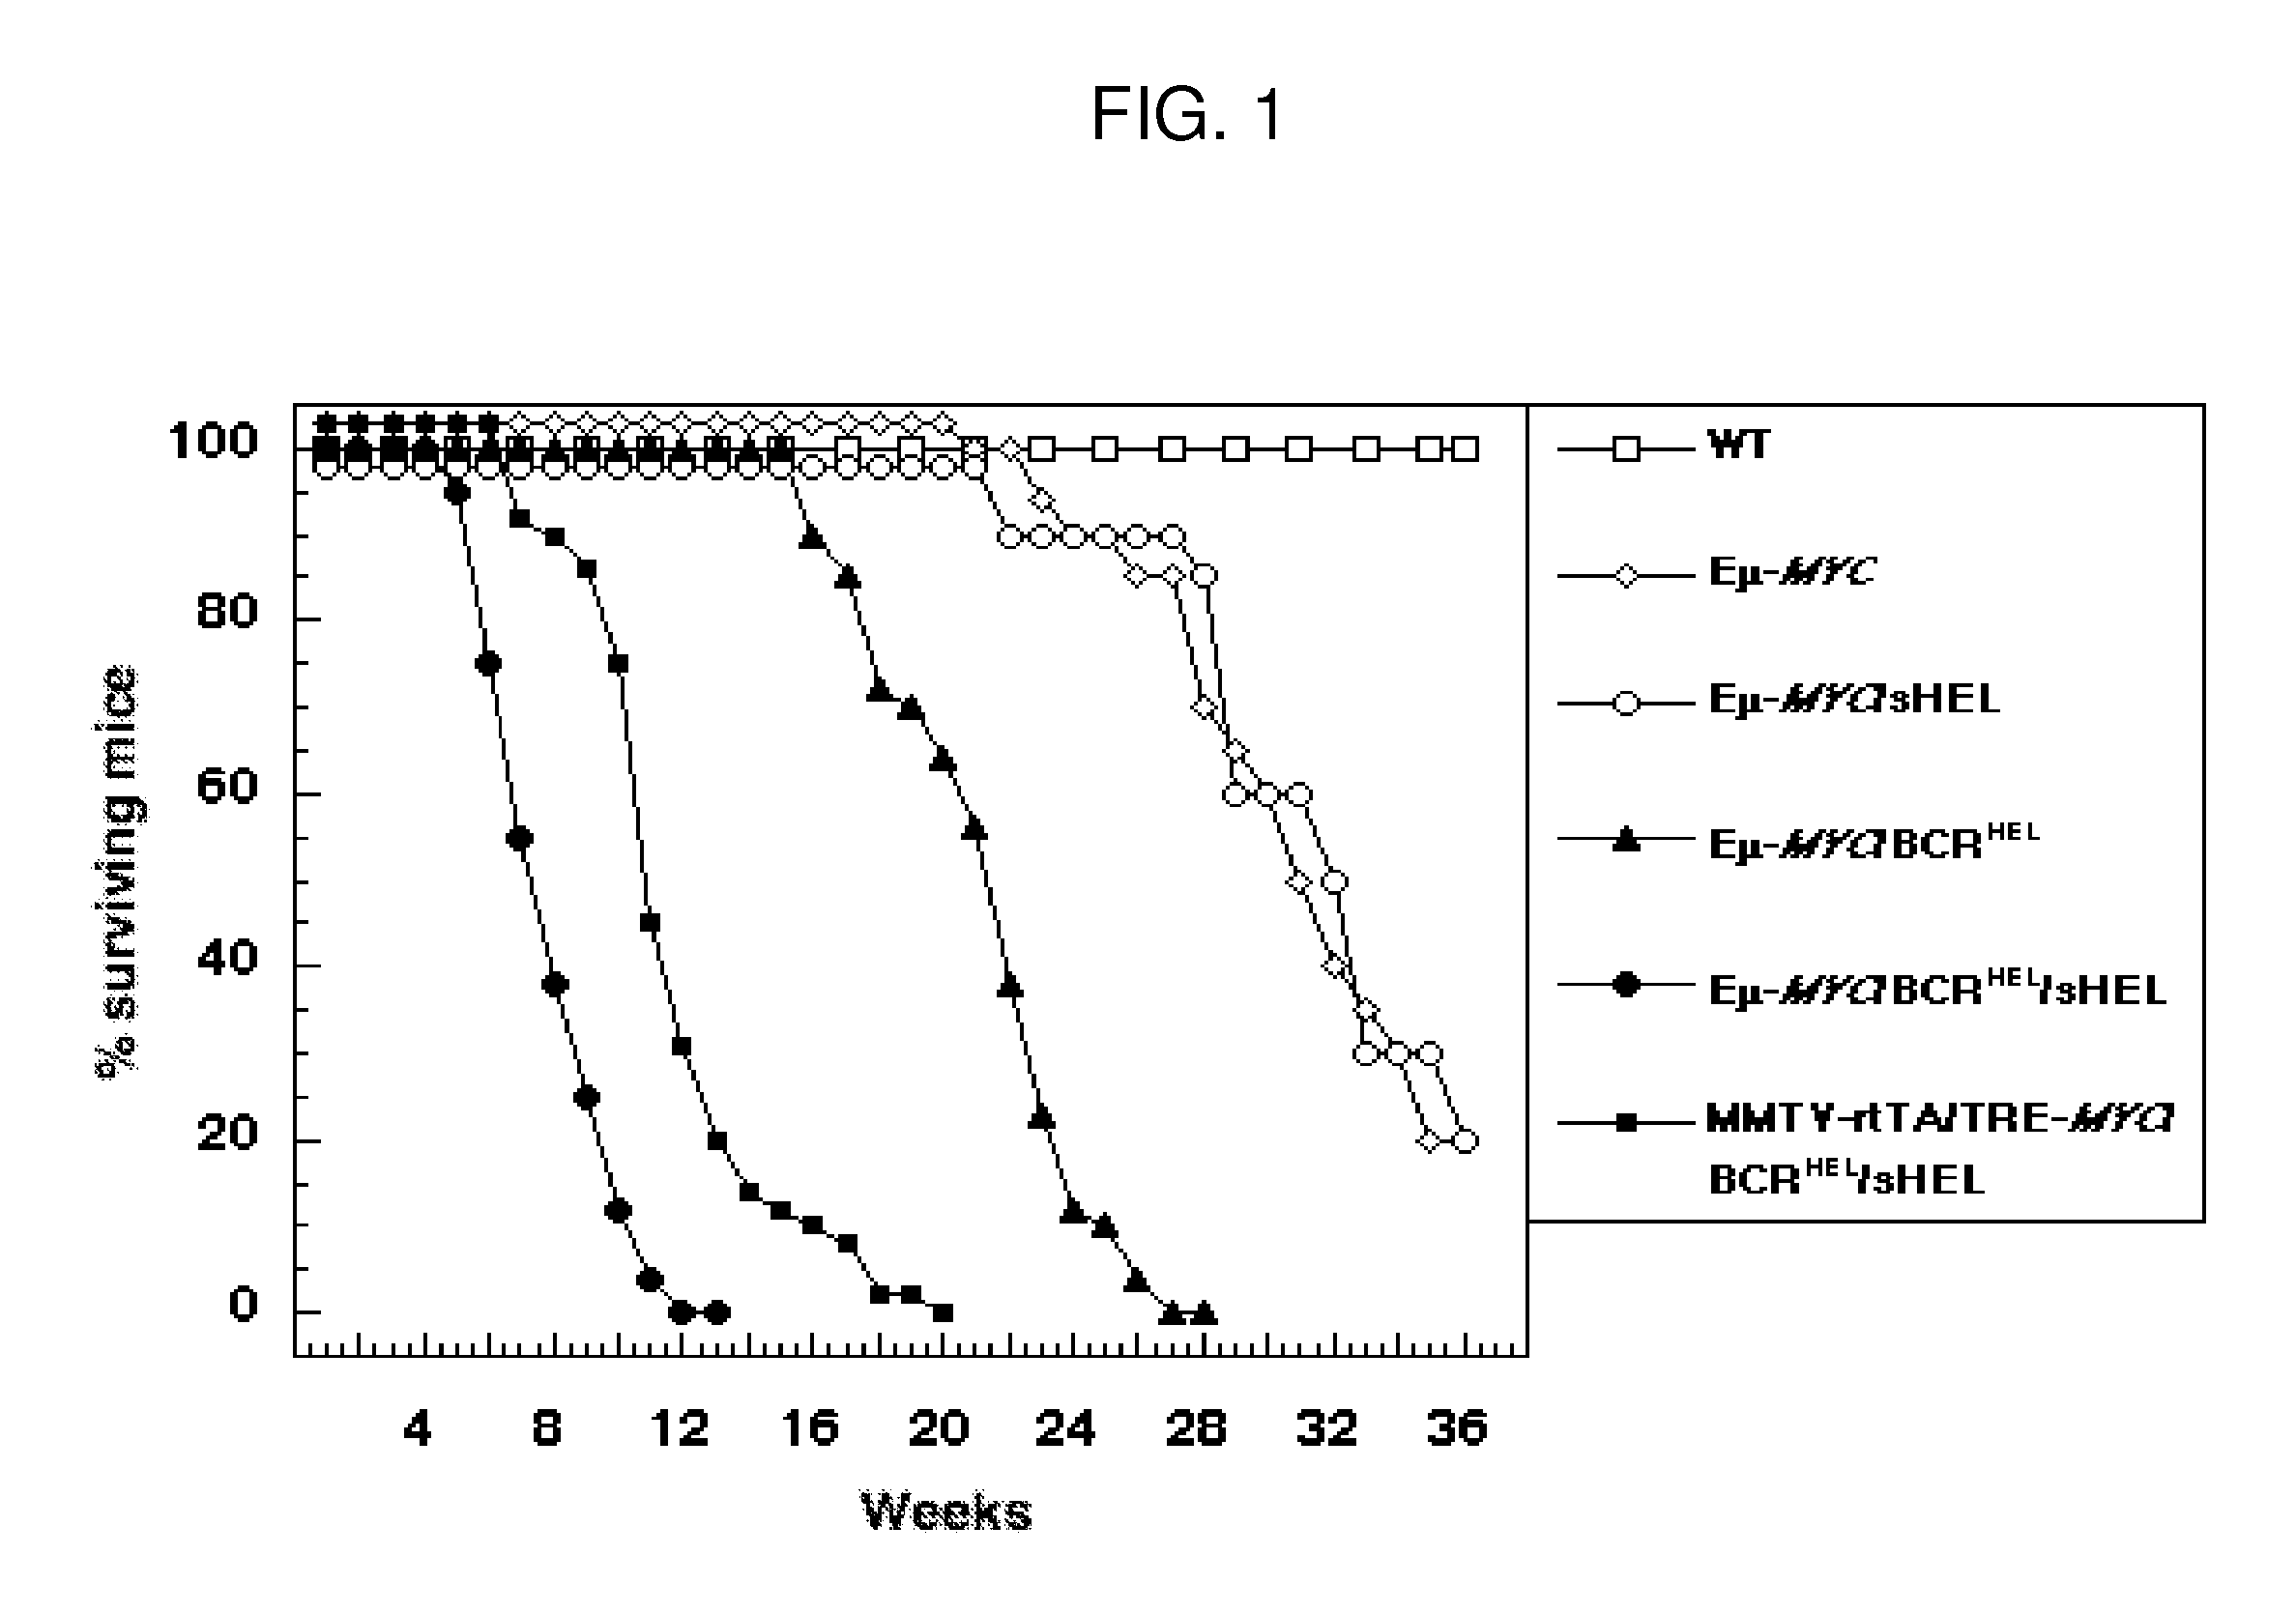 Non-Human Animal Models for B-cell Non-Hodgkin's Lymphoma and Uses Thereof